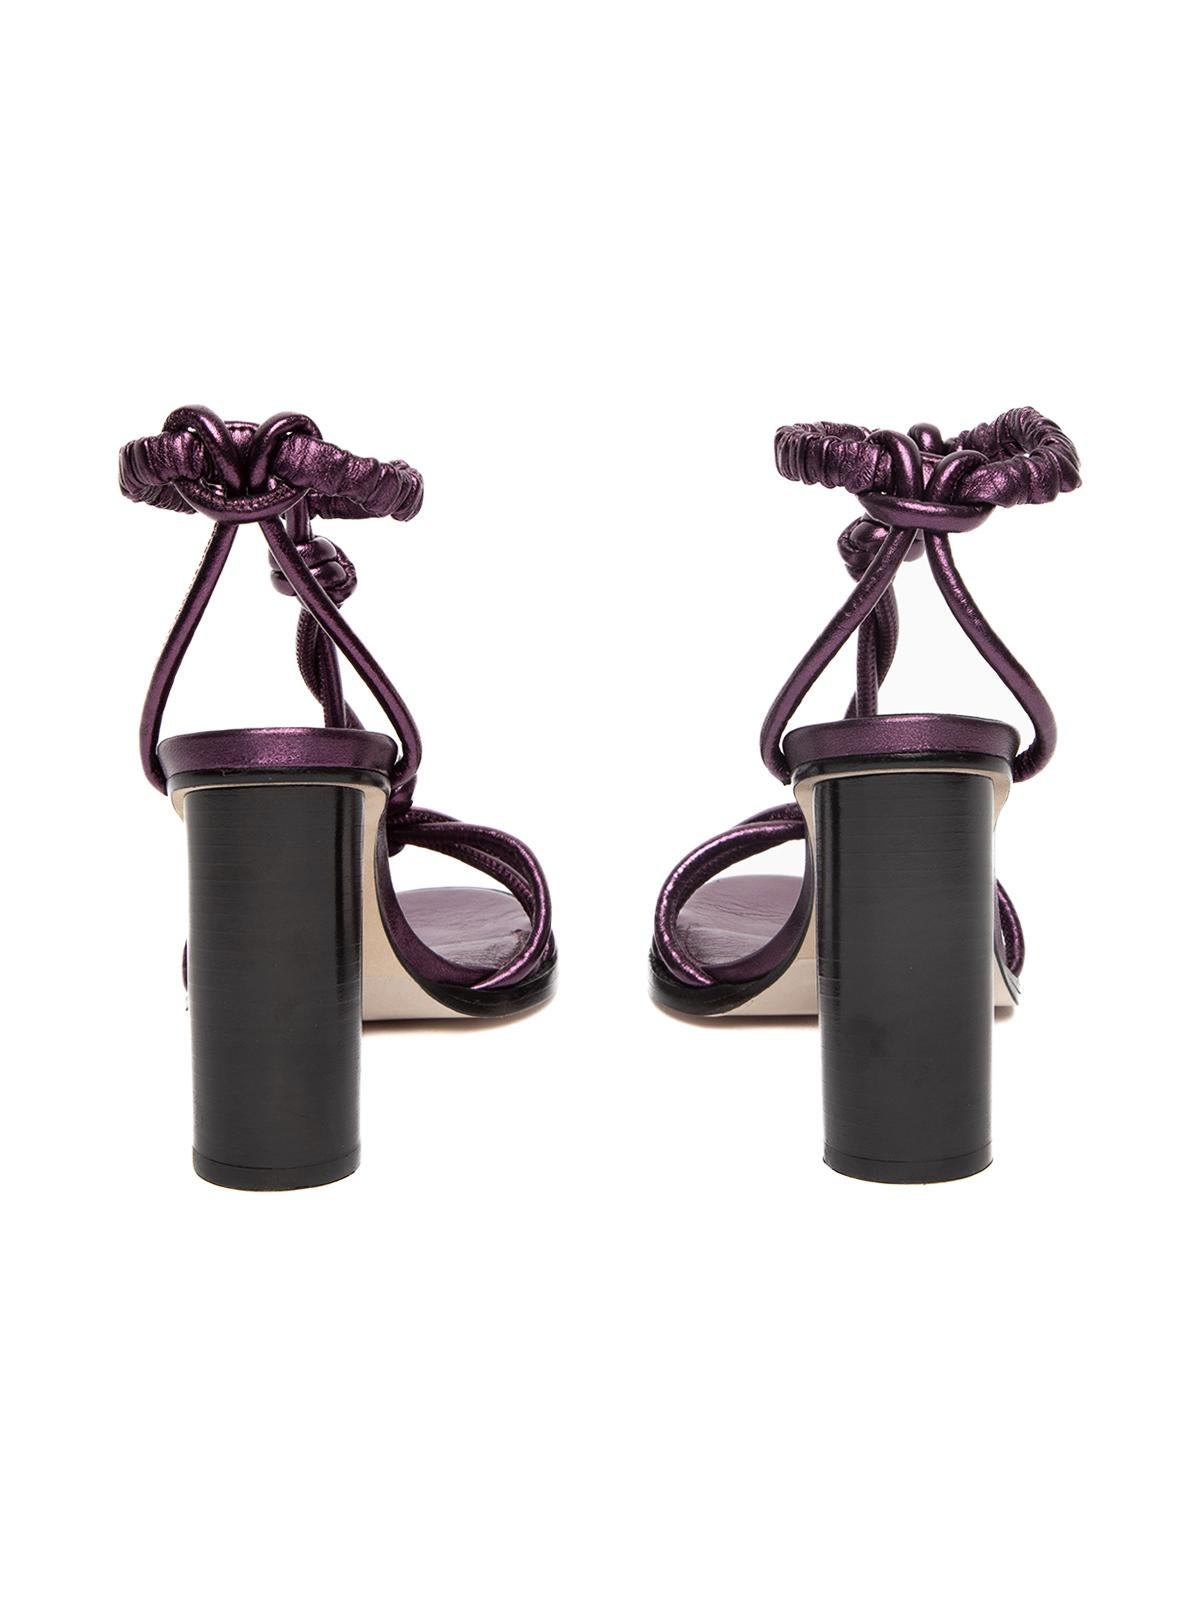 Tamara Mellon Women's Knot Leather Heeled Sandals in Aubergine In Excellent Condition For Sale In London, GB